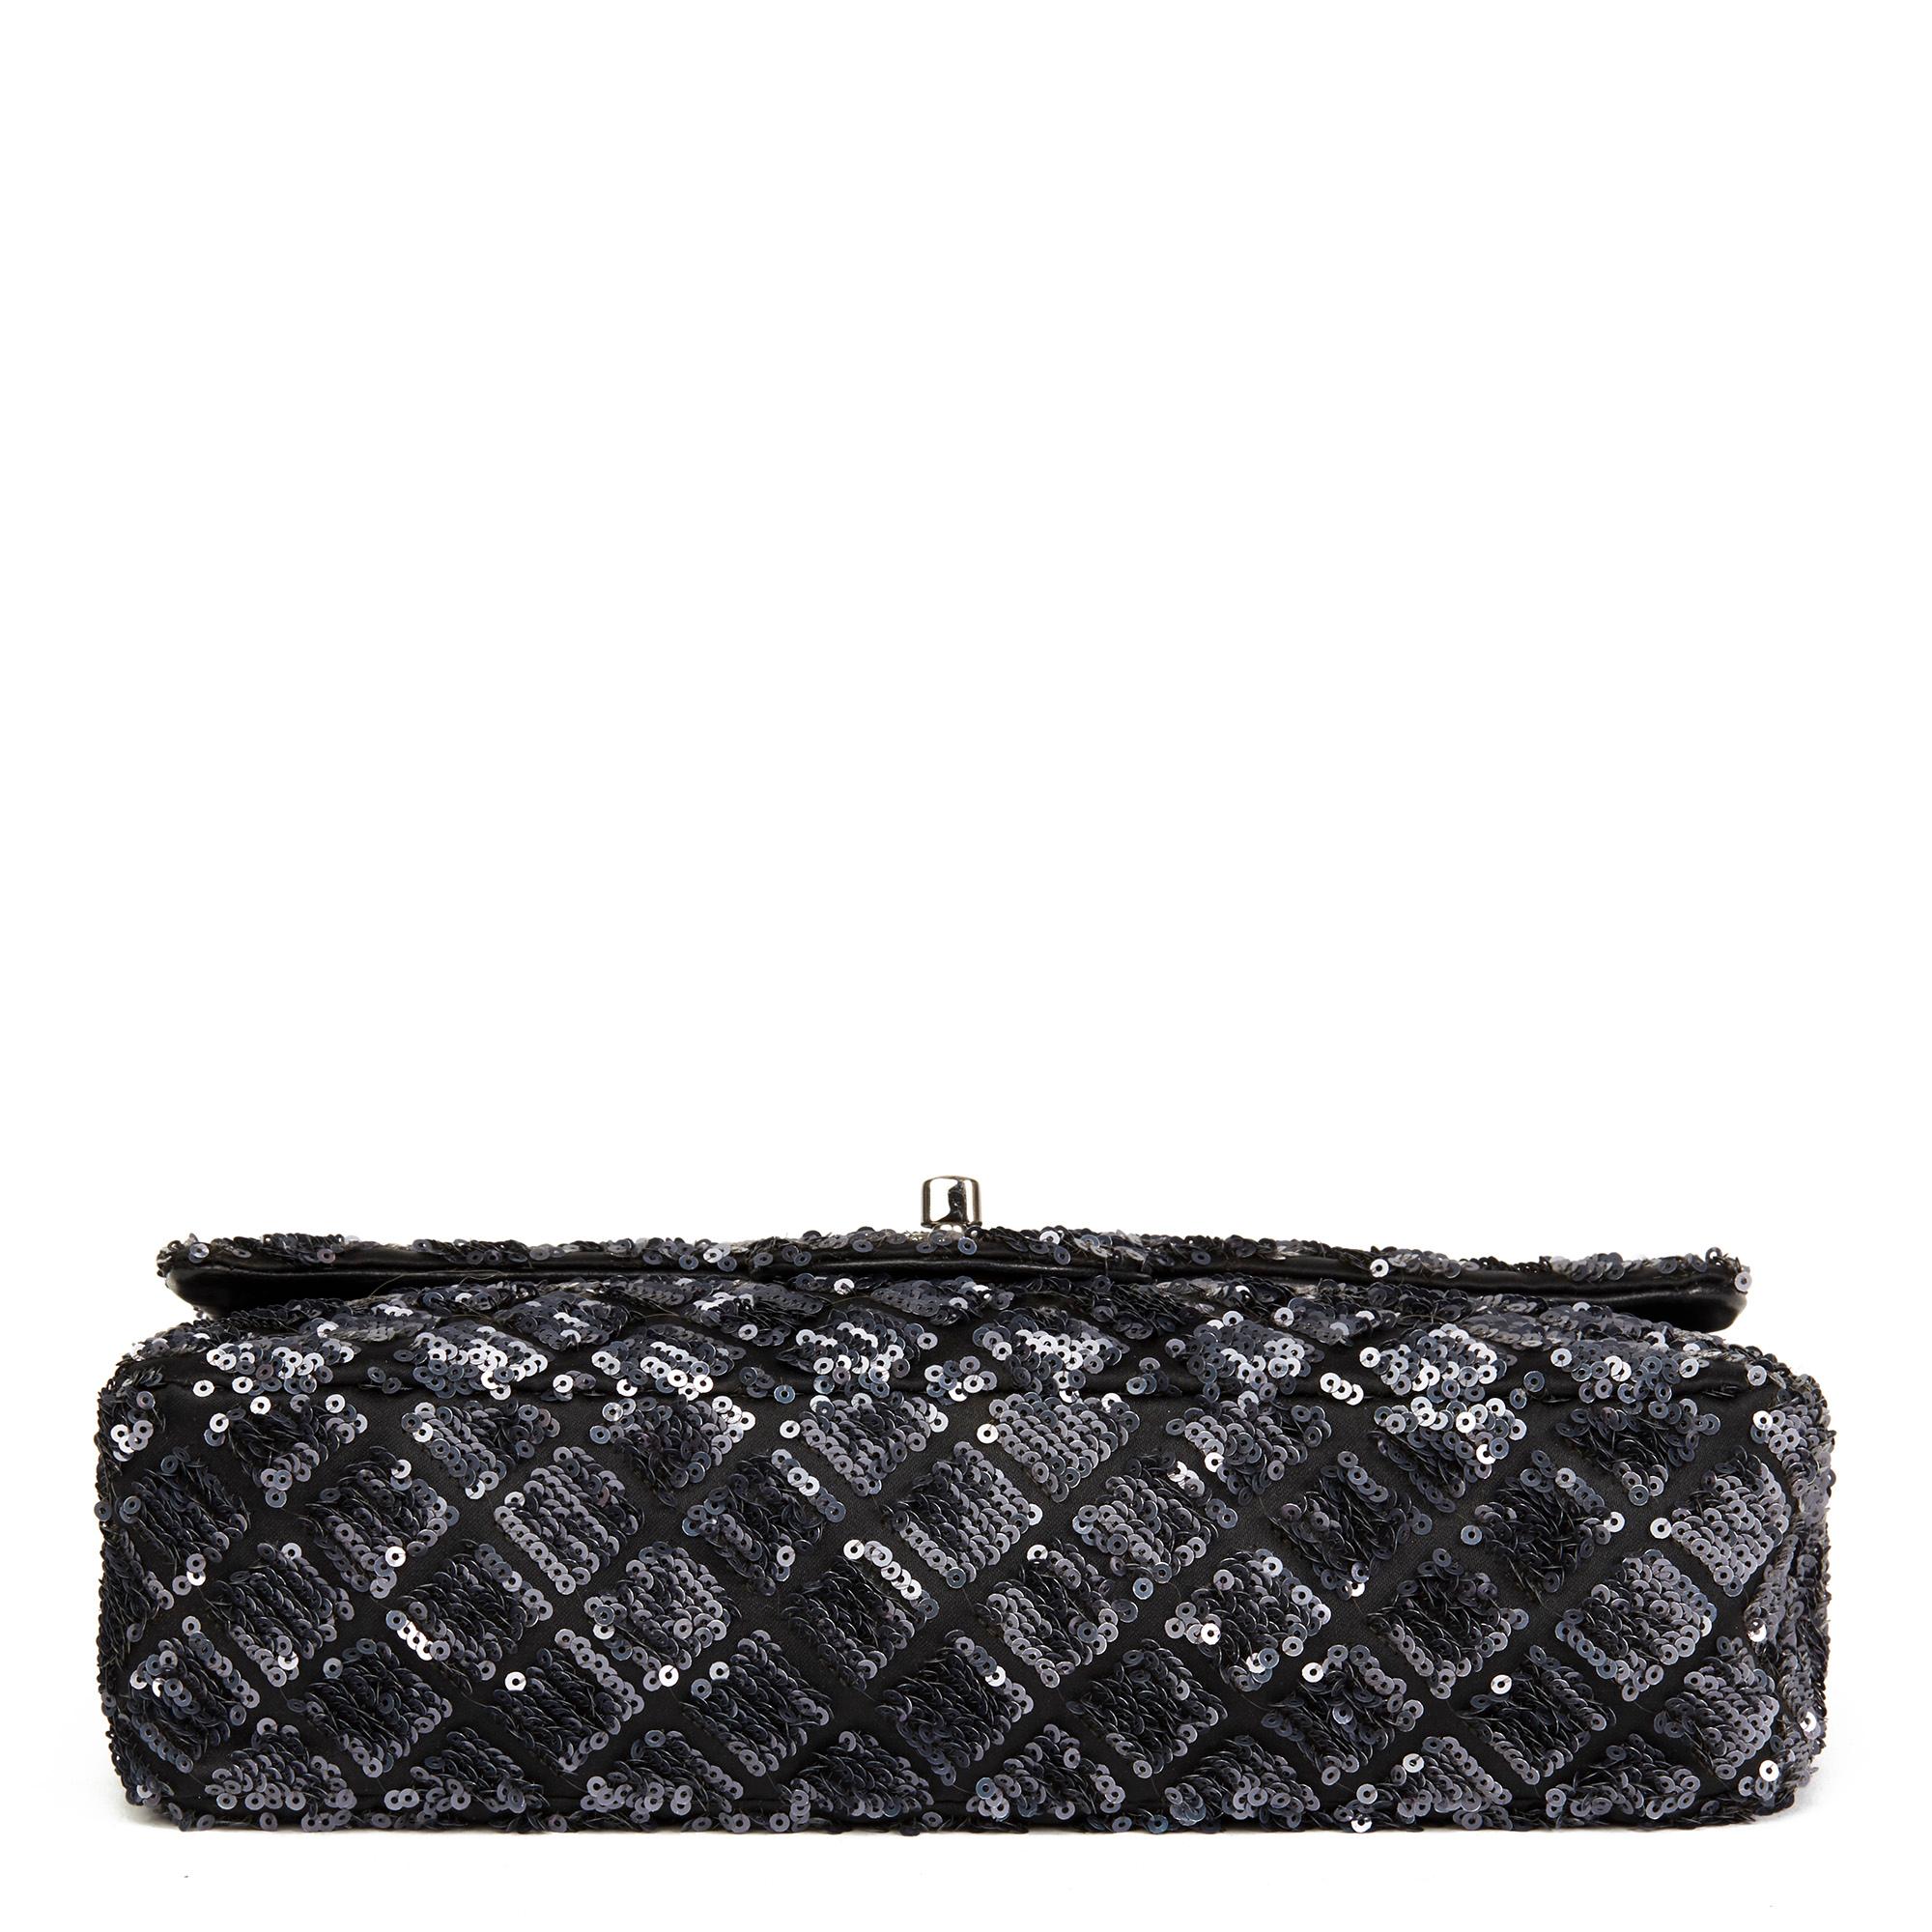 2013 Chanel Navy Sequin Embellished Classic Single Flap Bag 1